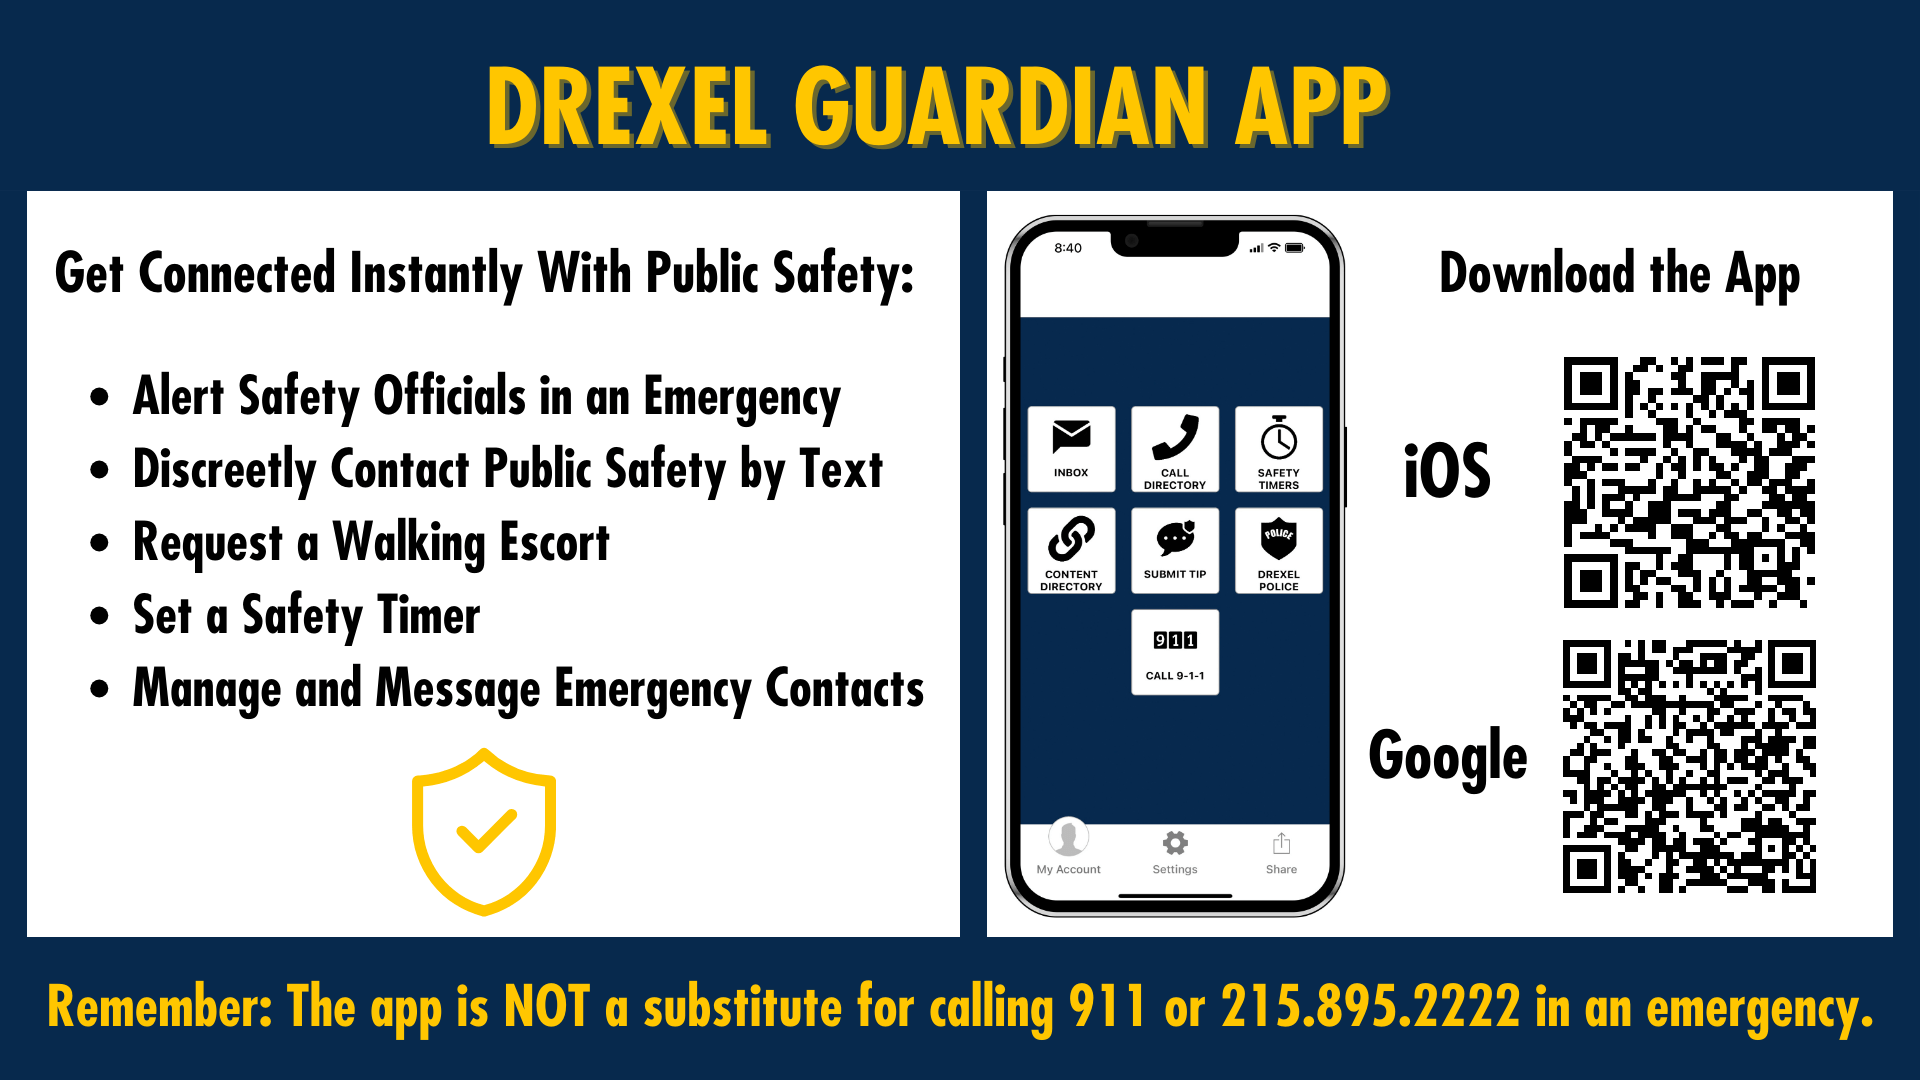 Drexel Guardian app. Get connected instantly with Public Safety: alert safety officials in an emergency. Discreetly contact public safety by text. Request a walking escort. Set a safety timer. Manage and message emergency contacts. QR codes to download the iOS and Google apps. The app is not a substitute for calling 911 or 215.895.222 in an emergency.